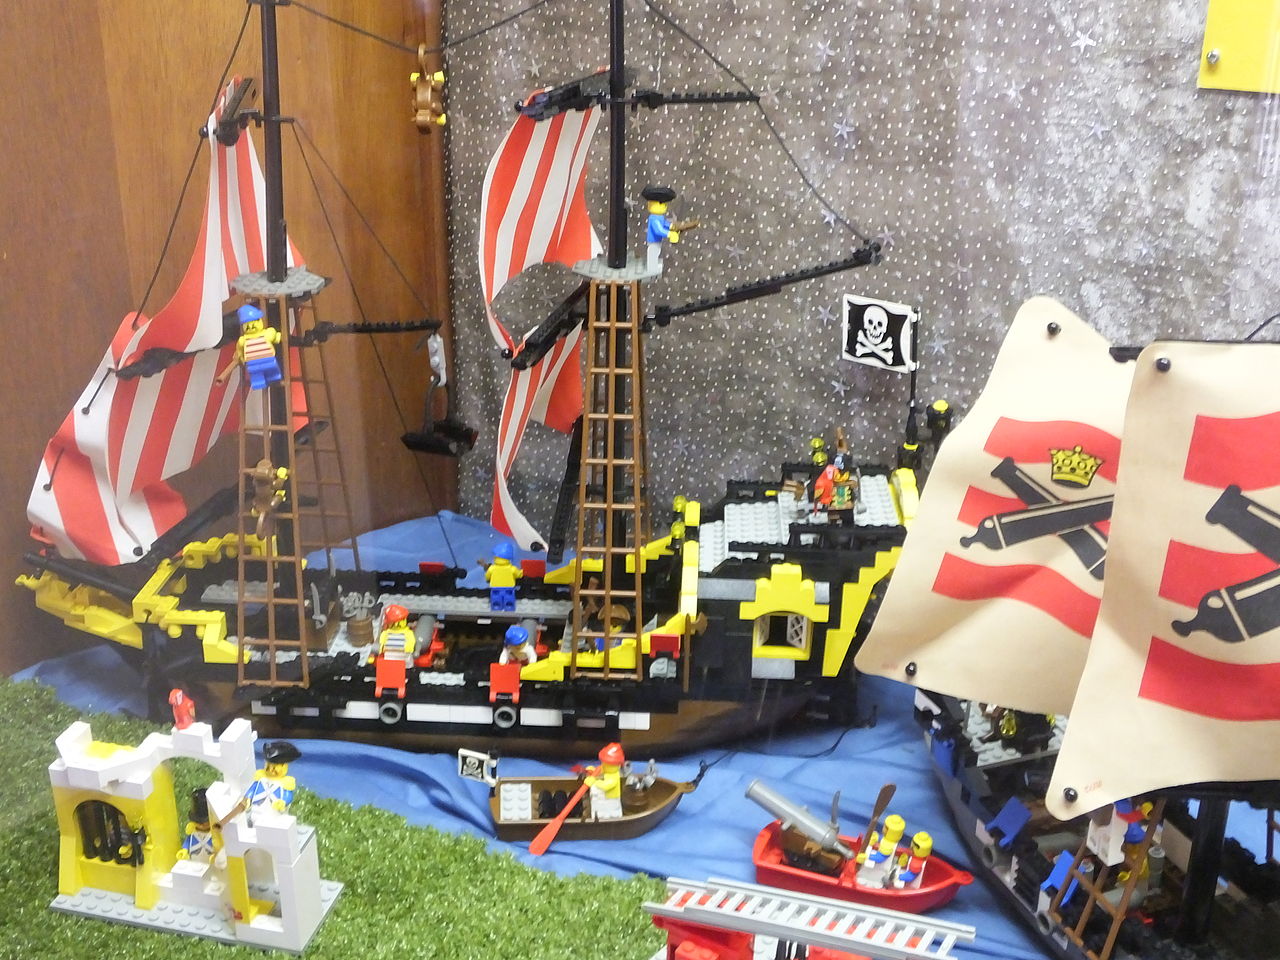 File:JLL Childhood Collection- Display of Lego- Pirate Lego 2760